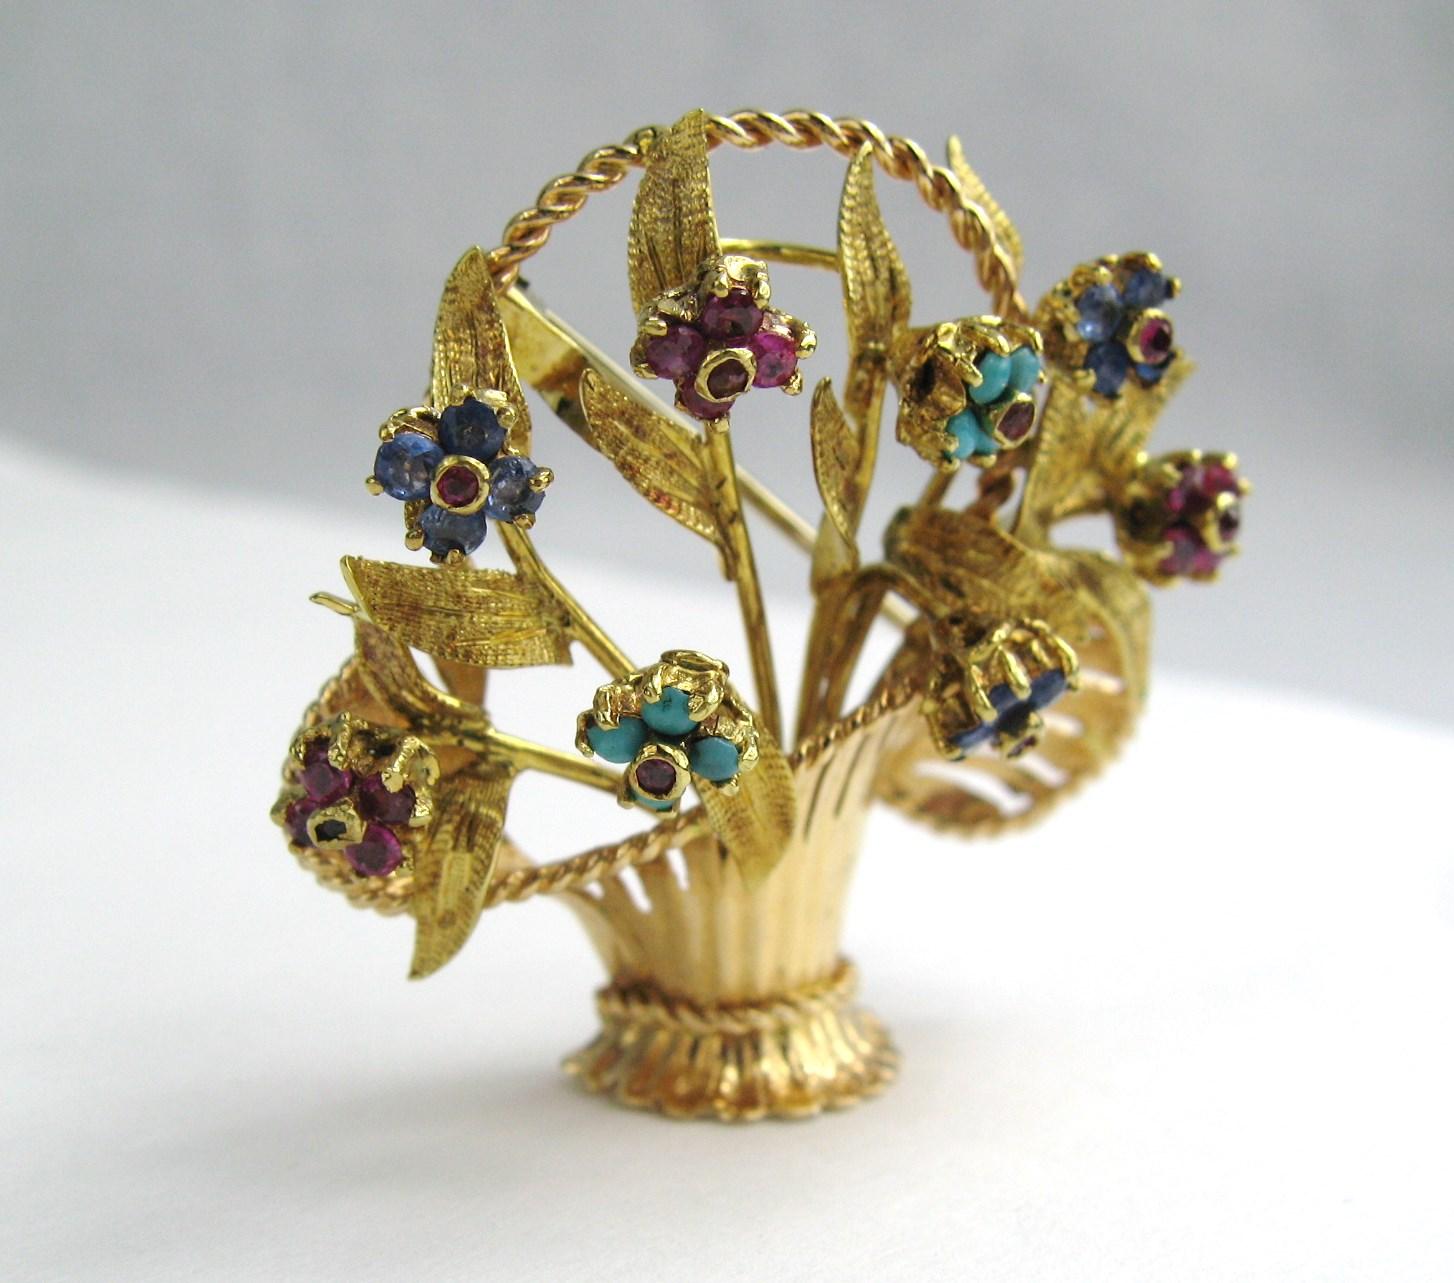  Lovely 18K Gold Tremblant brooch. Rubies, Turquoise, and Sapphire This is fabulous, each flower trembles and spins.  Has a loop on the back to add a chain. The brooch is hallmarked 750 and 1021 AL for the province of Alessandria Italy. This is out